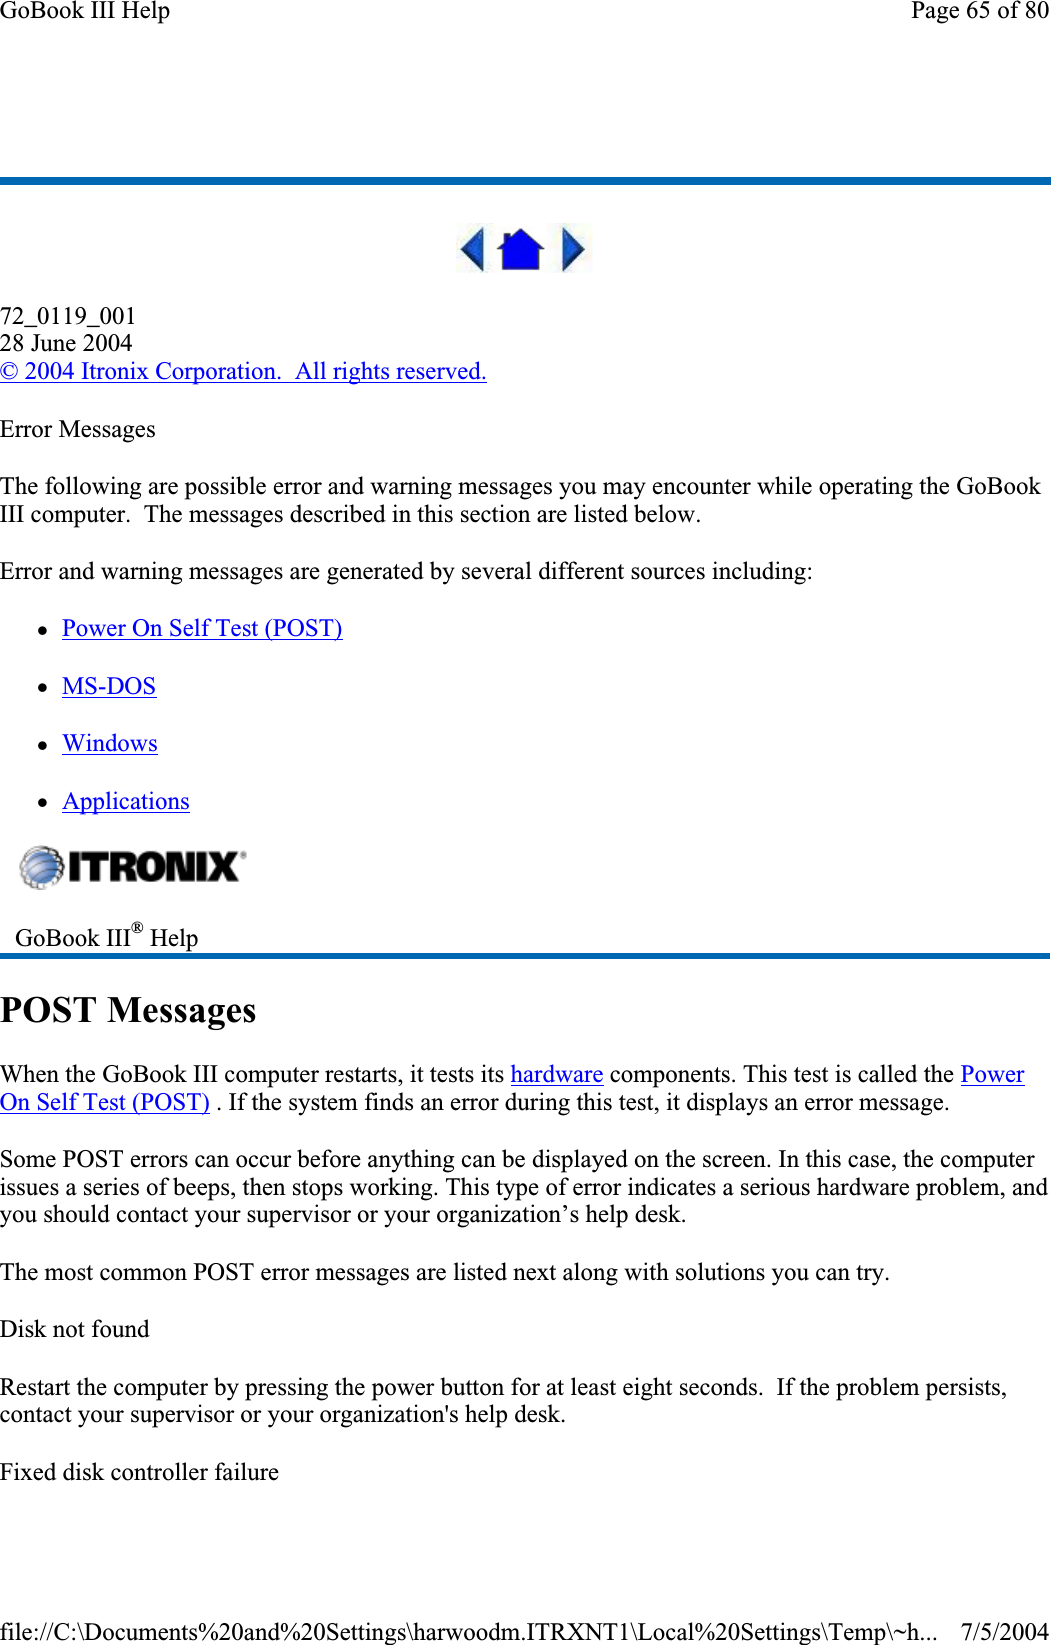 72_0119_00128 June 2004© 2004 Itronix Corporation.  All rights reserved.Error Messages The following are possible error and warning messages you may encounter while operating the GoBook III computer.  The messages described in this section are listed below.Error and warning messages are generated by several different sources including: zPower On Self Test (POST)zMS-DOSzWindowszApplicationsPOST Messages When the GoBook III computer restarts, it tests its hardware components. This test is called the PowerOn Self Test (POST) . If the system finds an error during this test, it displays an error message.Some POST errors can occur before anything can be displayed on the screen. In this case, the computer issues a series of beeps, then stops working. This type of error indicates a serious hardware problem, and you should contact your supervisor or your organization’s help desk. The most common POST error messages are listed next along with solutions you can try. Disk not found Restart the computer by pressing the power button for at least eight seconds. If the problem persists, contact your supervisor or your organization&apos;s help desk. Fixed disk controller failure GoBook III® HelpPage 65 of 80GoBook III Help7/5/2004file://C:\Documents%20and%20Settings\harwoodm.ITRXNT1\Local%20Settings\Temp\~h...